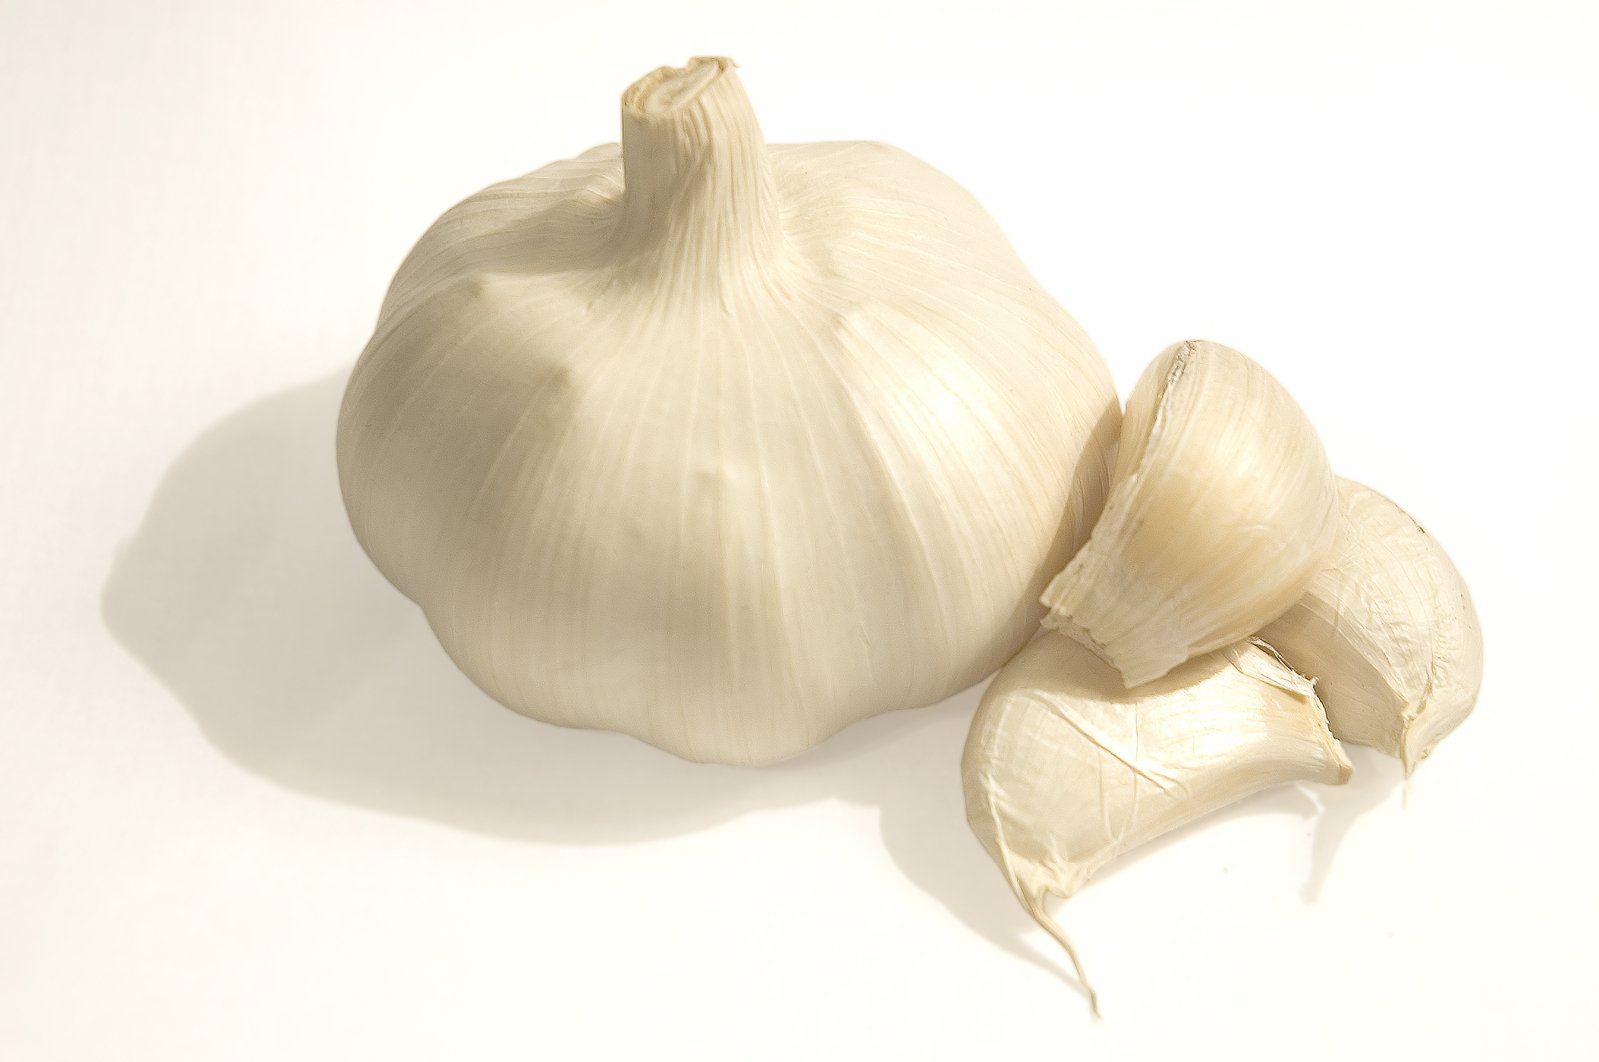 two pieces of garlic on top of a white table